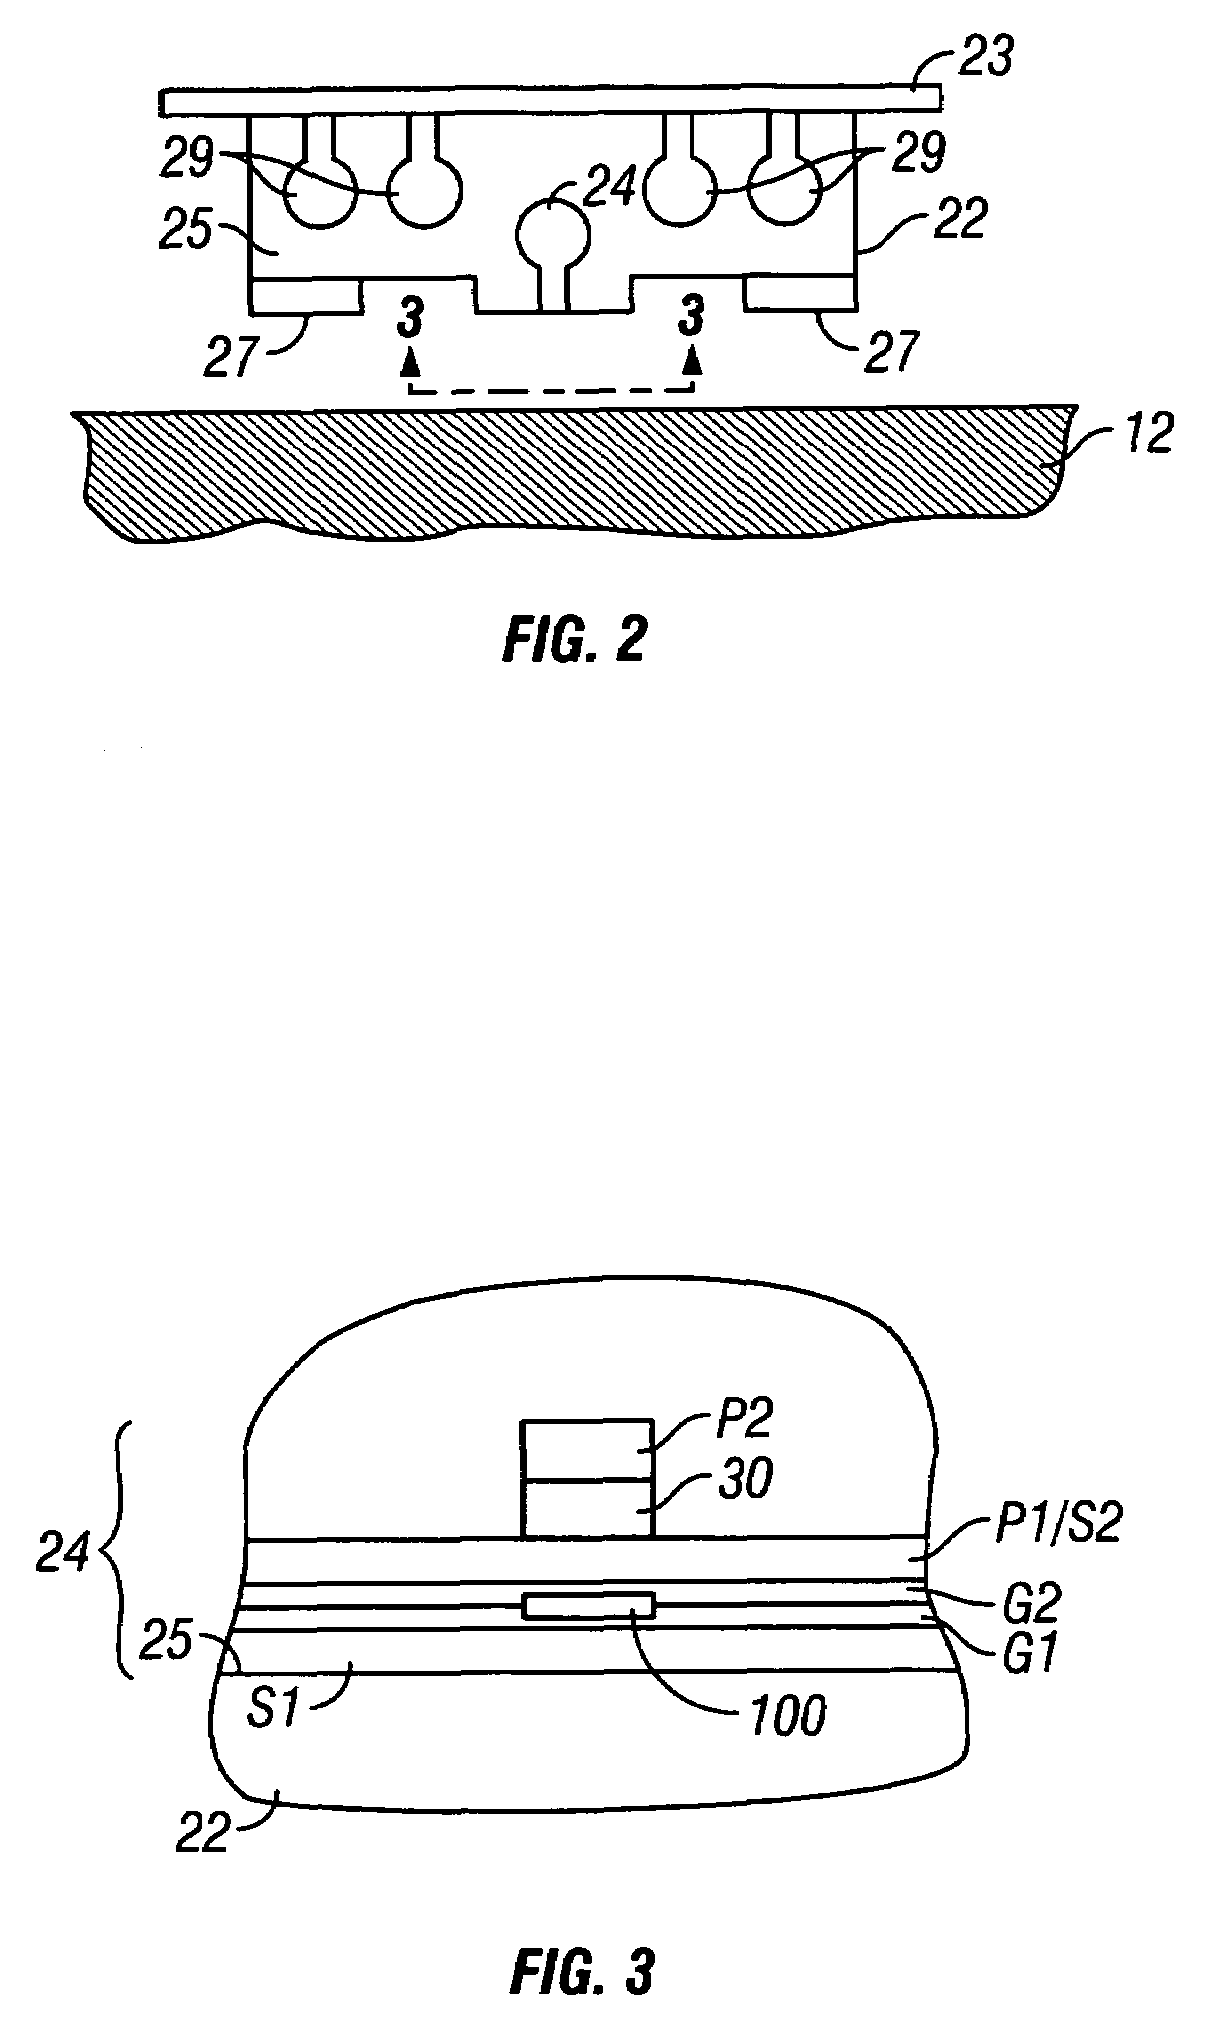 Magnetic recording disk drive with patterned media and compensation for write-clock timing error caused by rotational disturbances